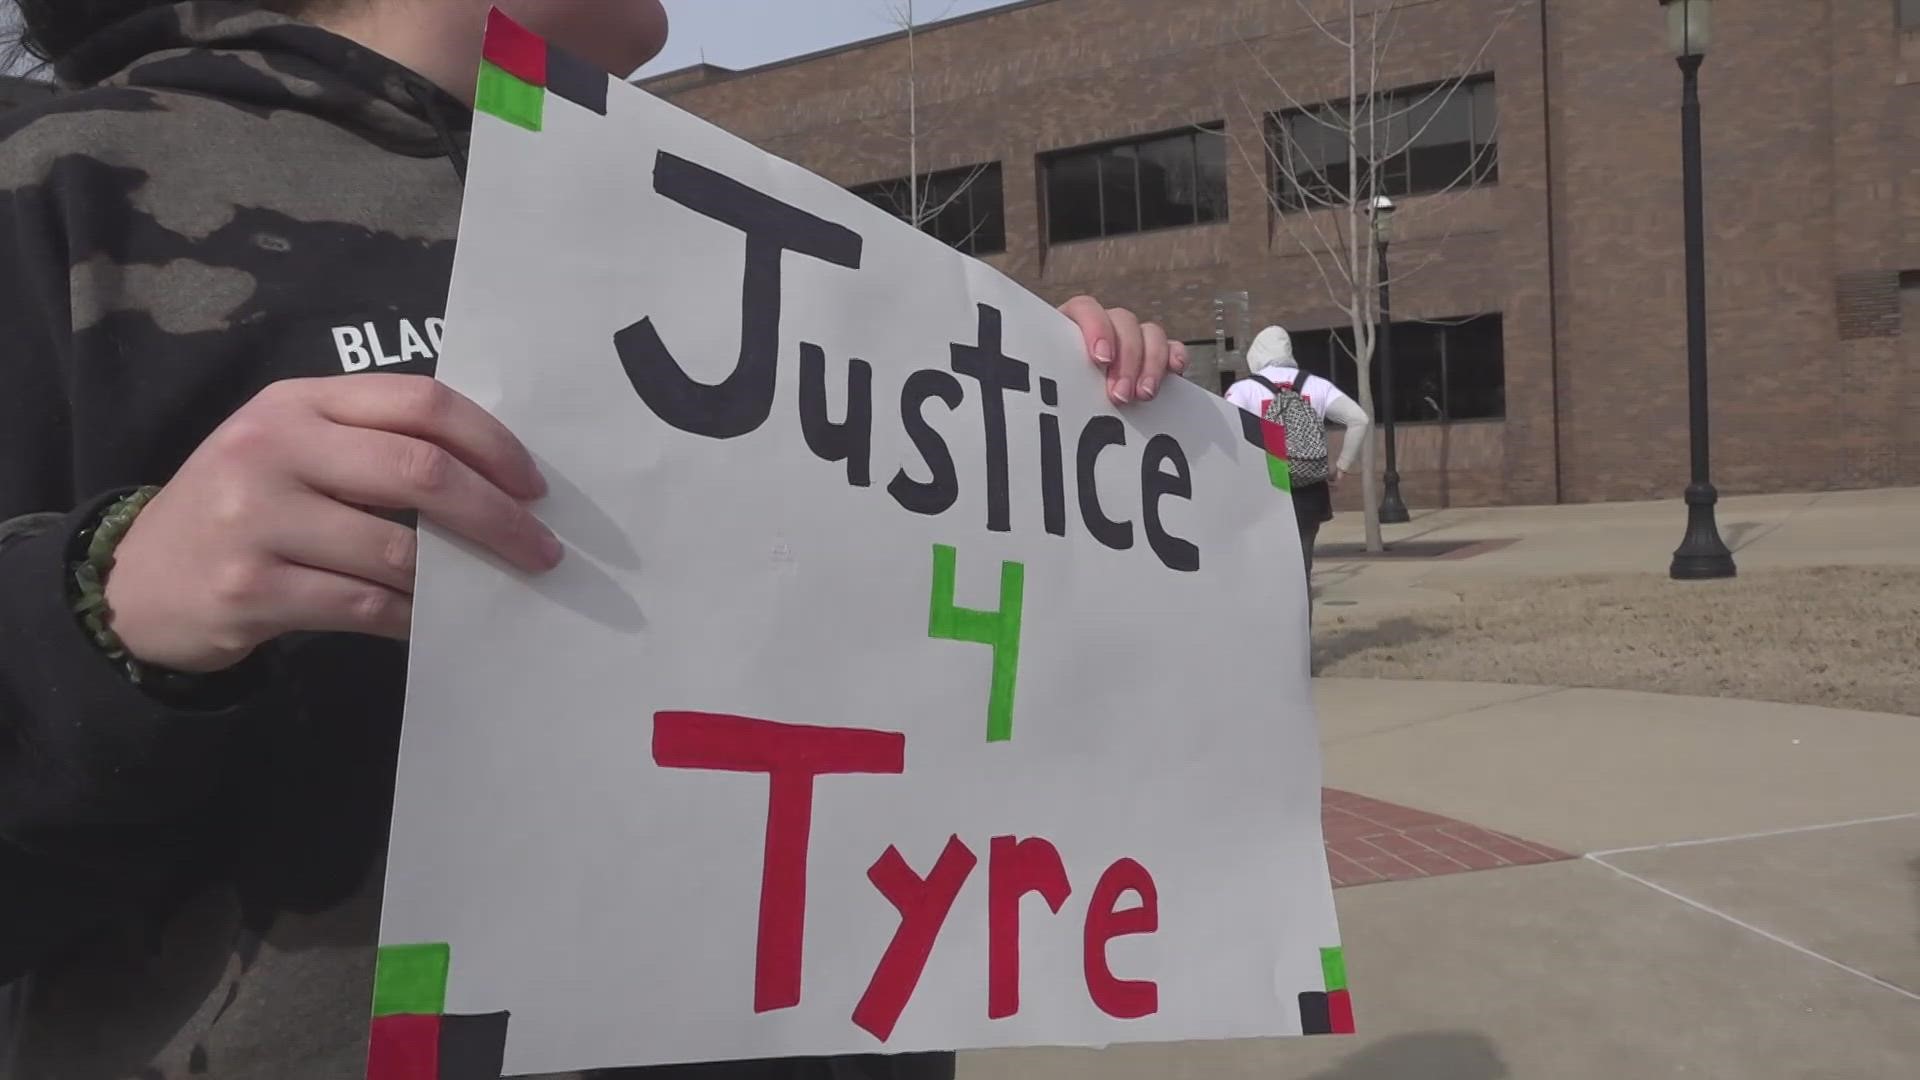 Protesters gathered in downtown Belleville on Saturday calling for change and justice in the wake of Tyre Nichols' death.